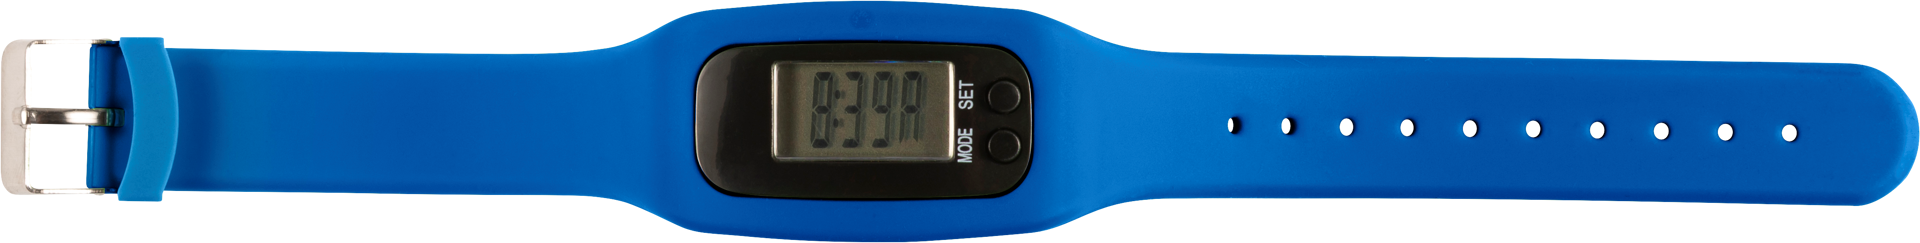 Blue pedometer with a black screen 